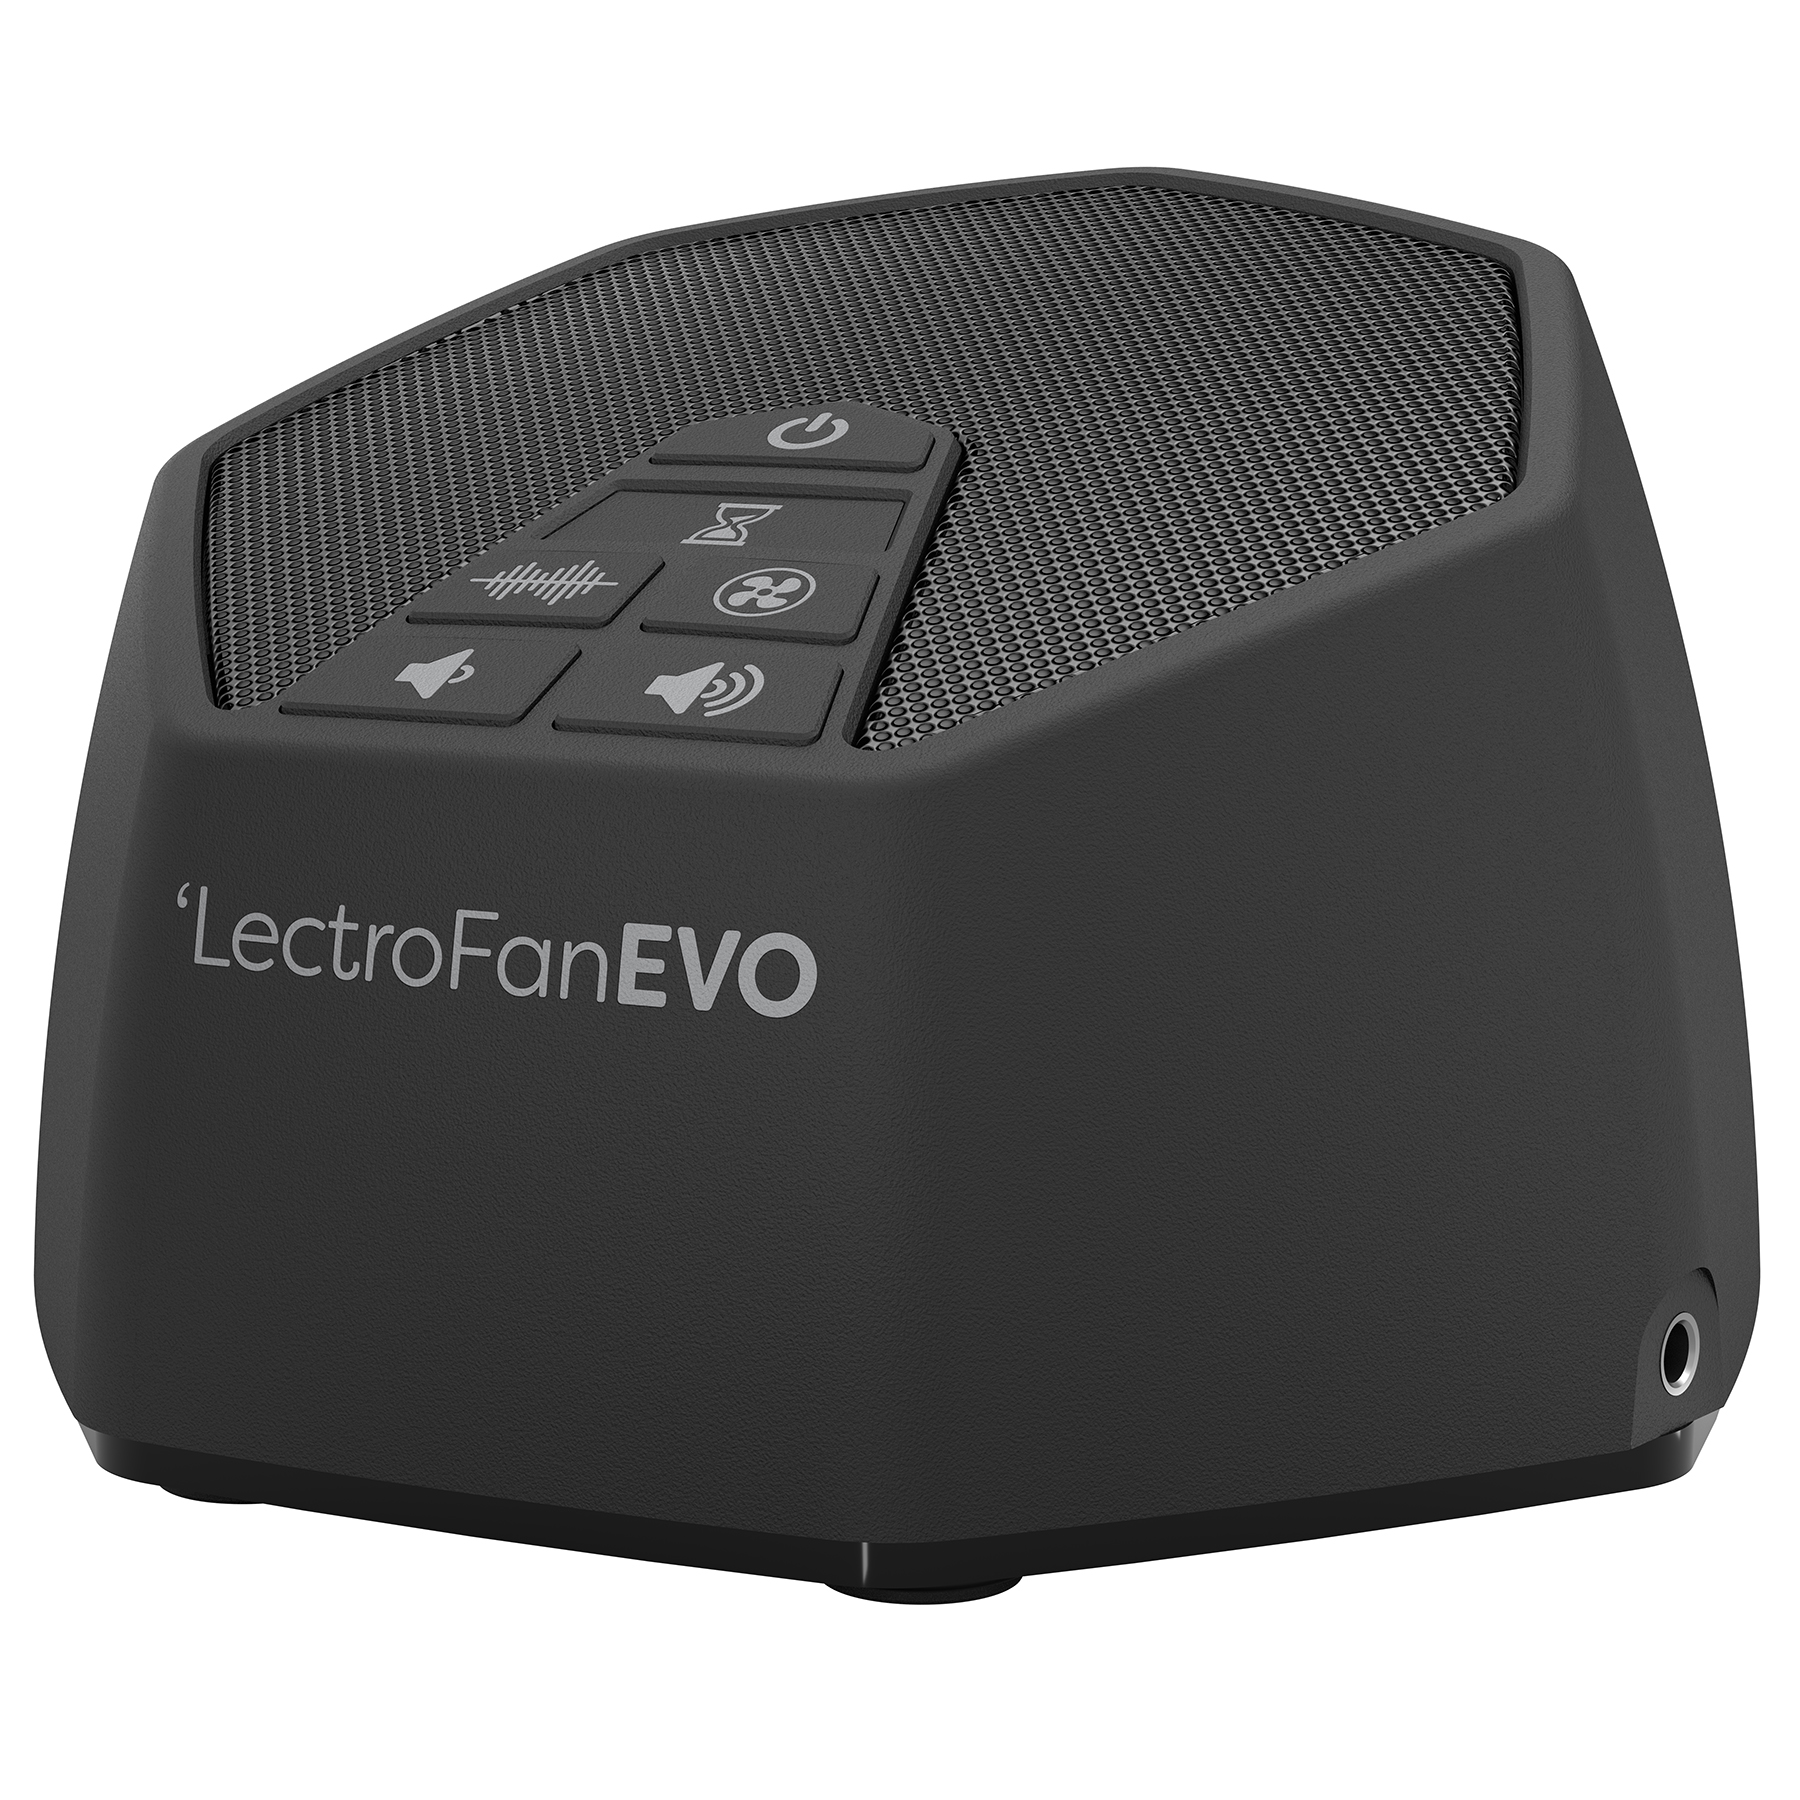 LectroFan EVO: Sound & Noise Machine For Sleep, Rest and Relaxation - Black - image 2 of 5